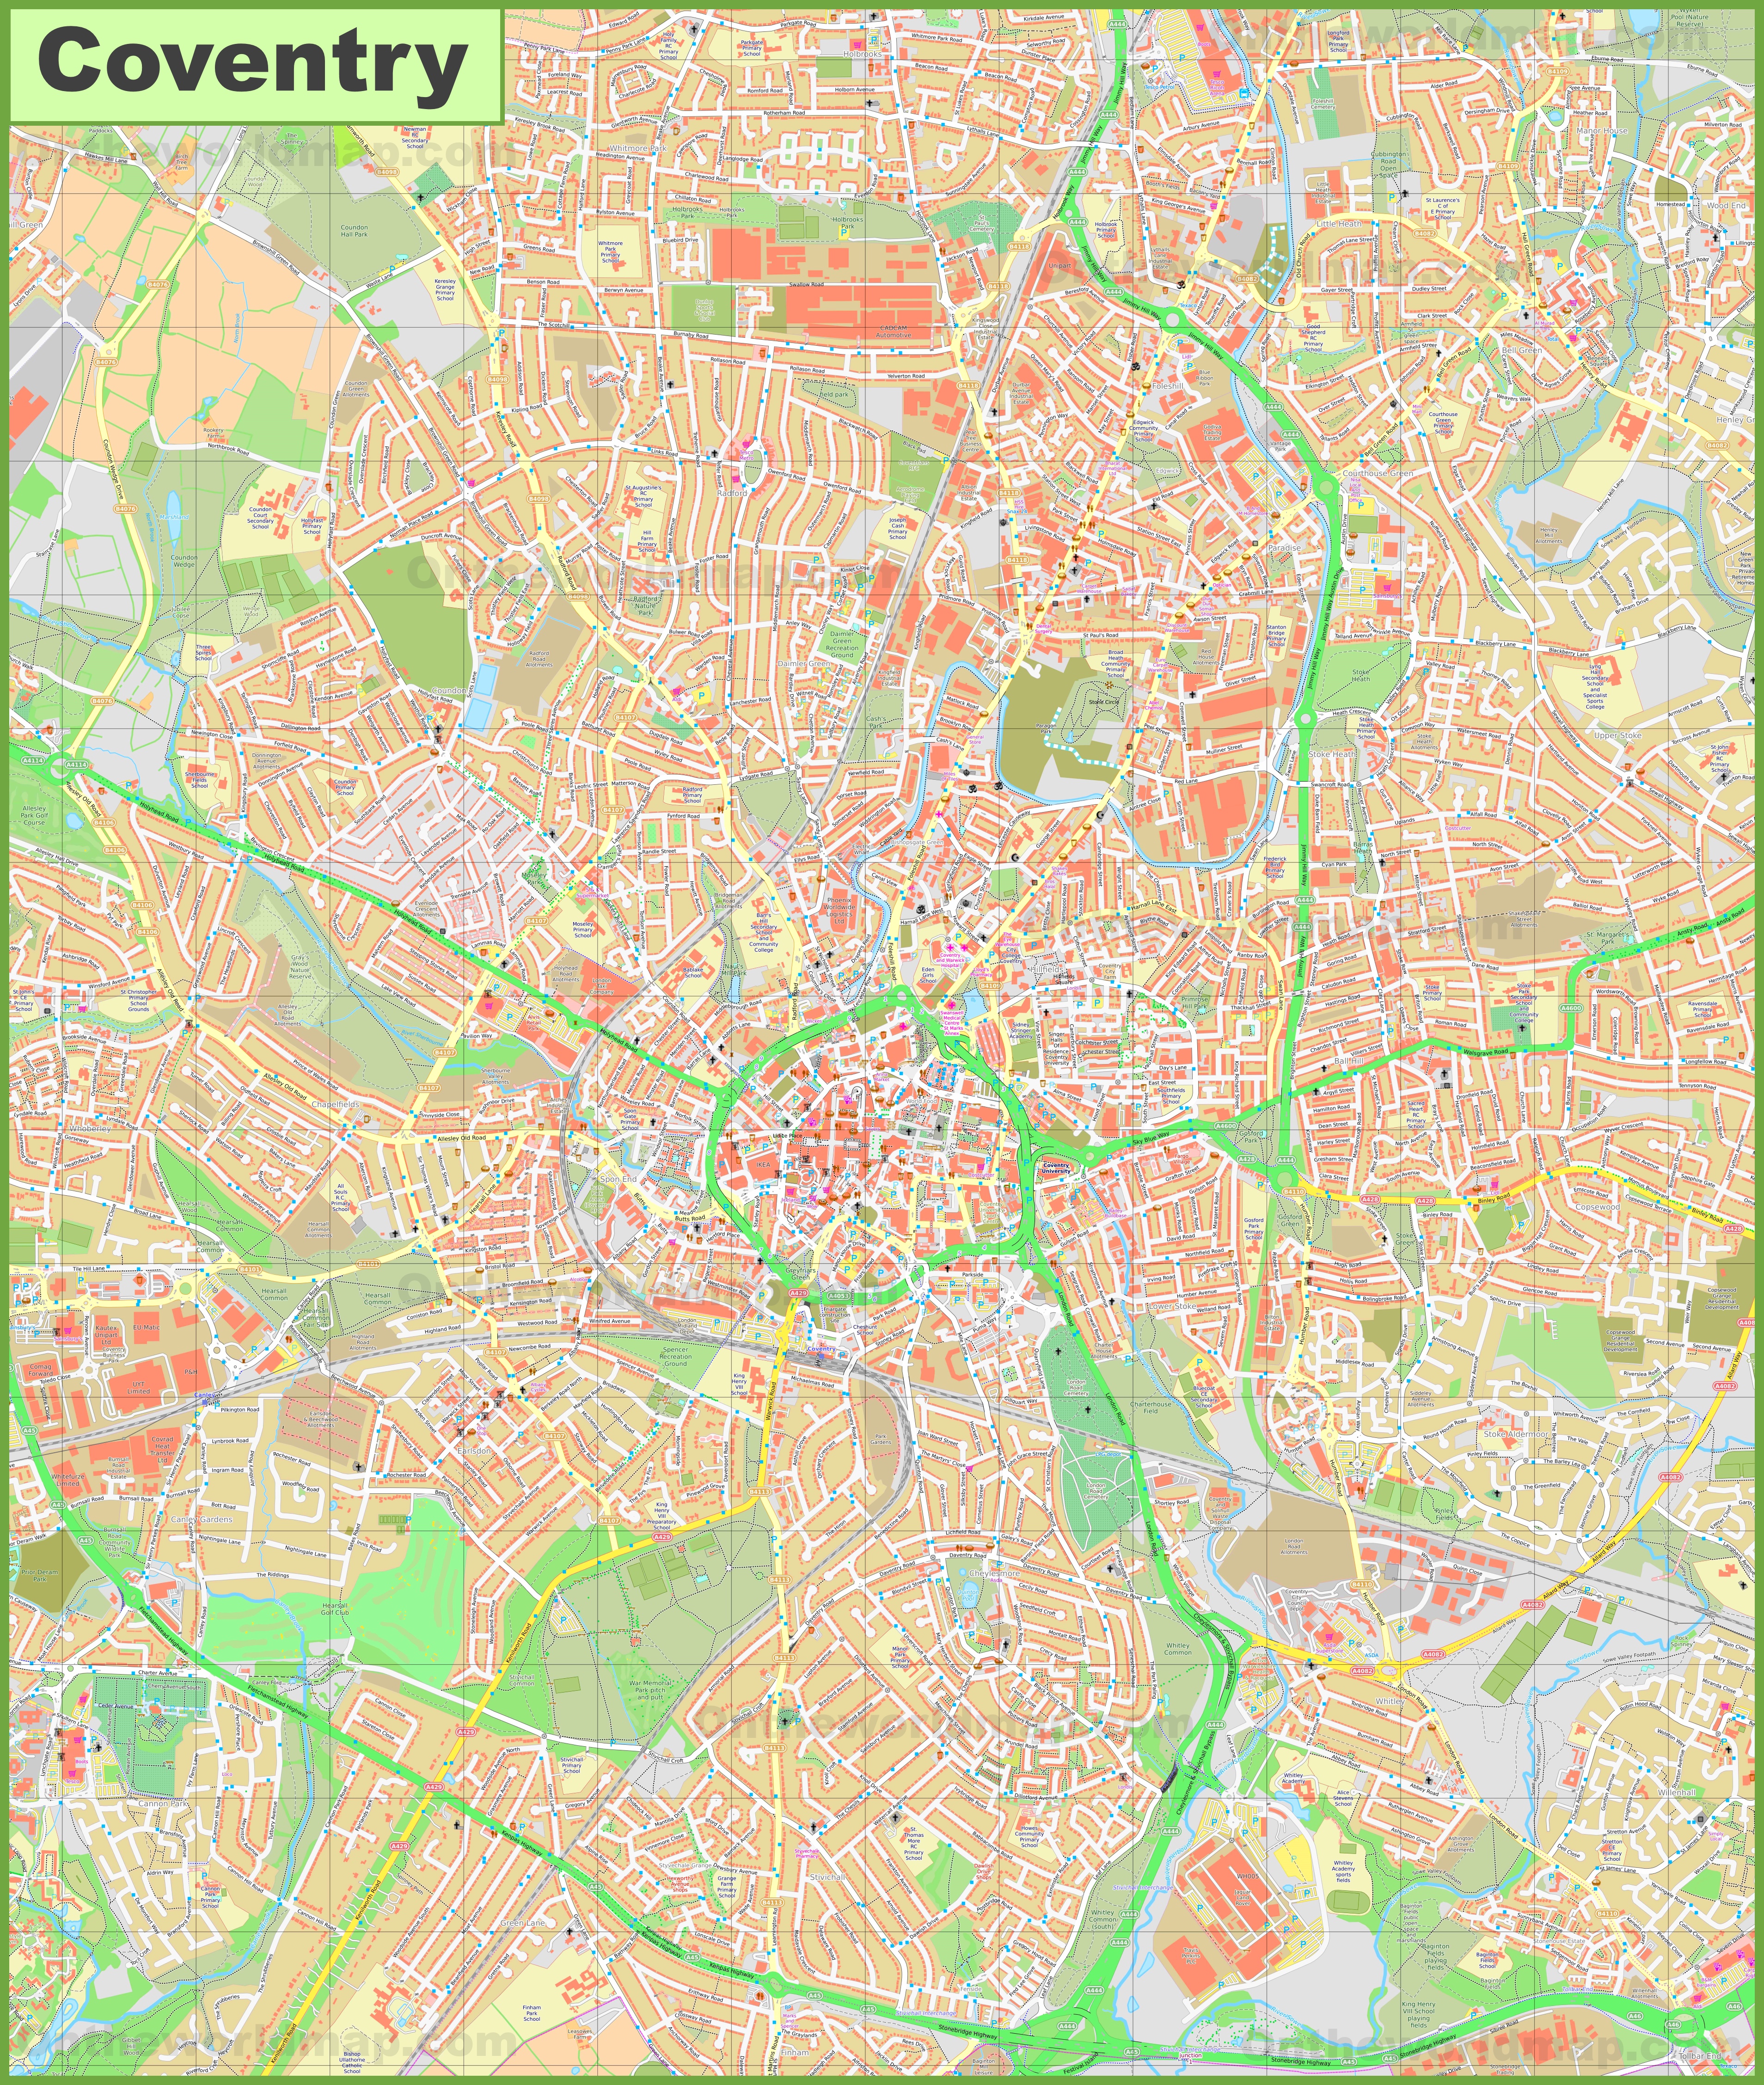 Detailed map of Coventry3816 x 4511